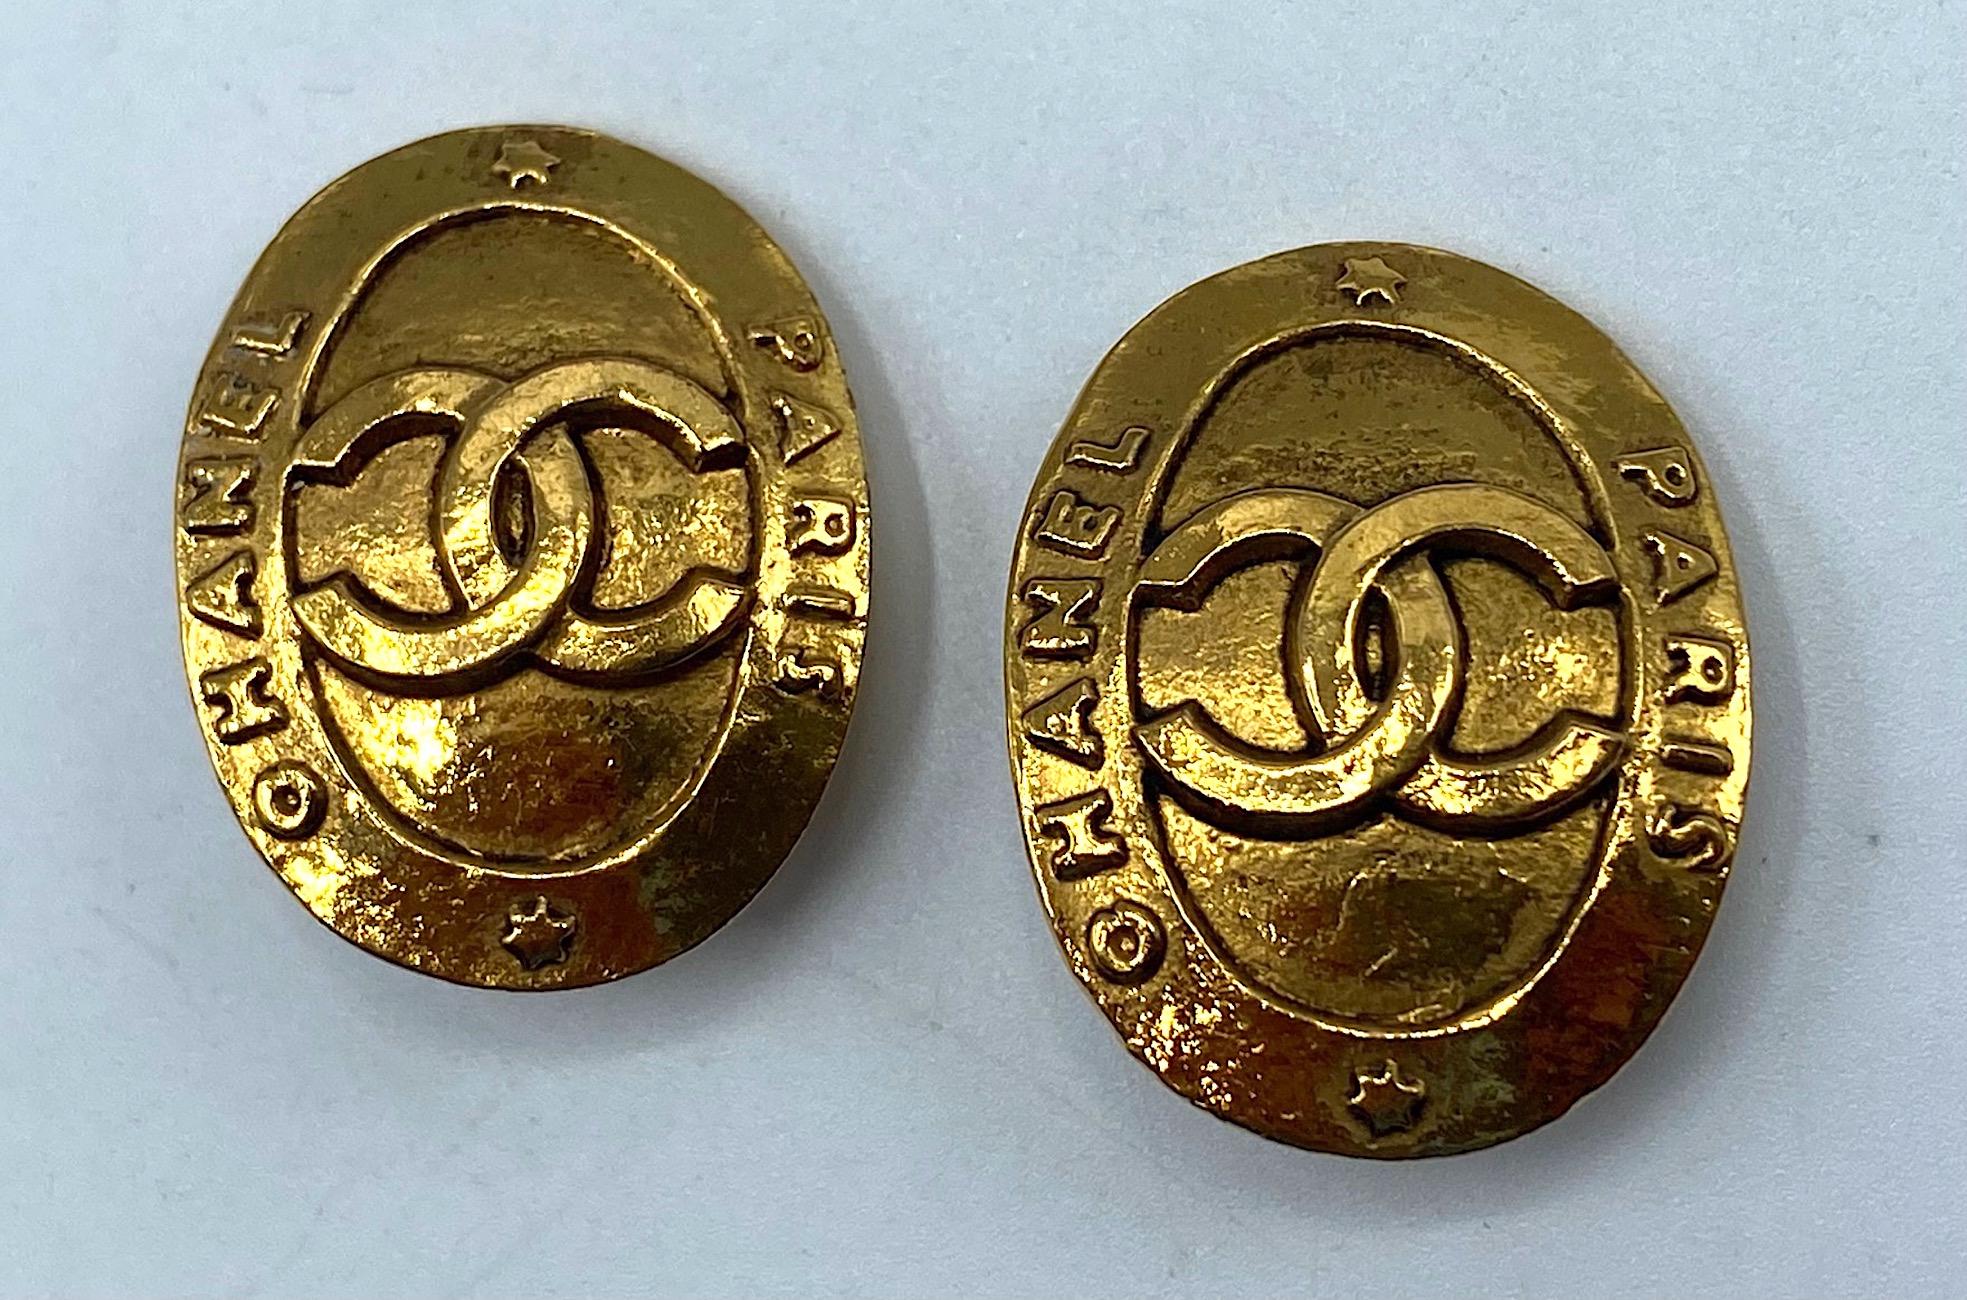 A beautiful pair of Chanel button style earrings from 1991. Produced under the direction of jewelry designer Victoire De Castellane who was hired by Karl Lagerfeld for Chanel in 1986. Each earring is a rich 18K gold plate, measures .88 of an inch